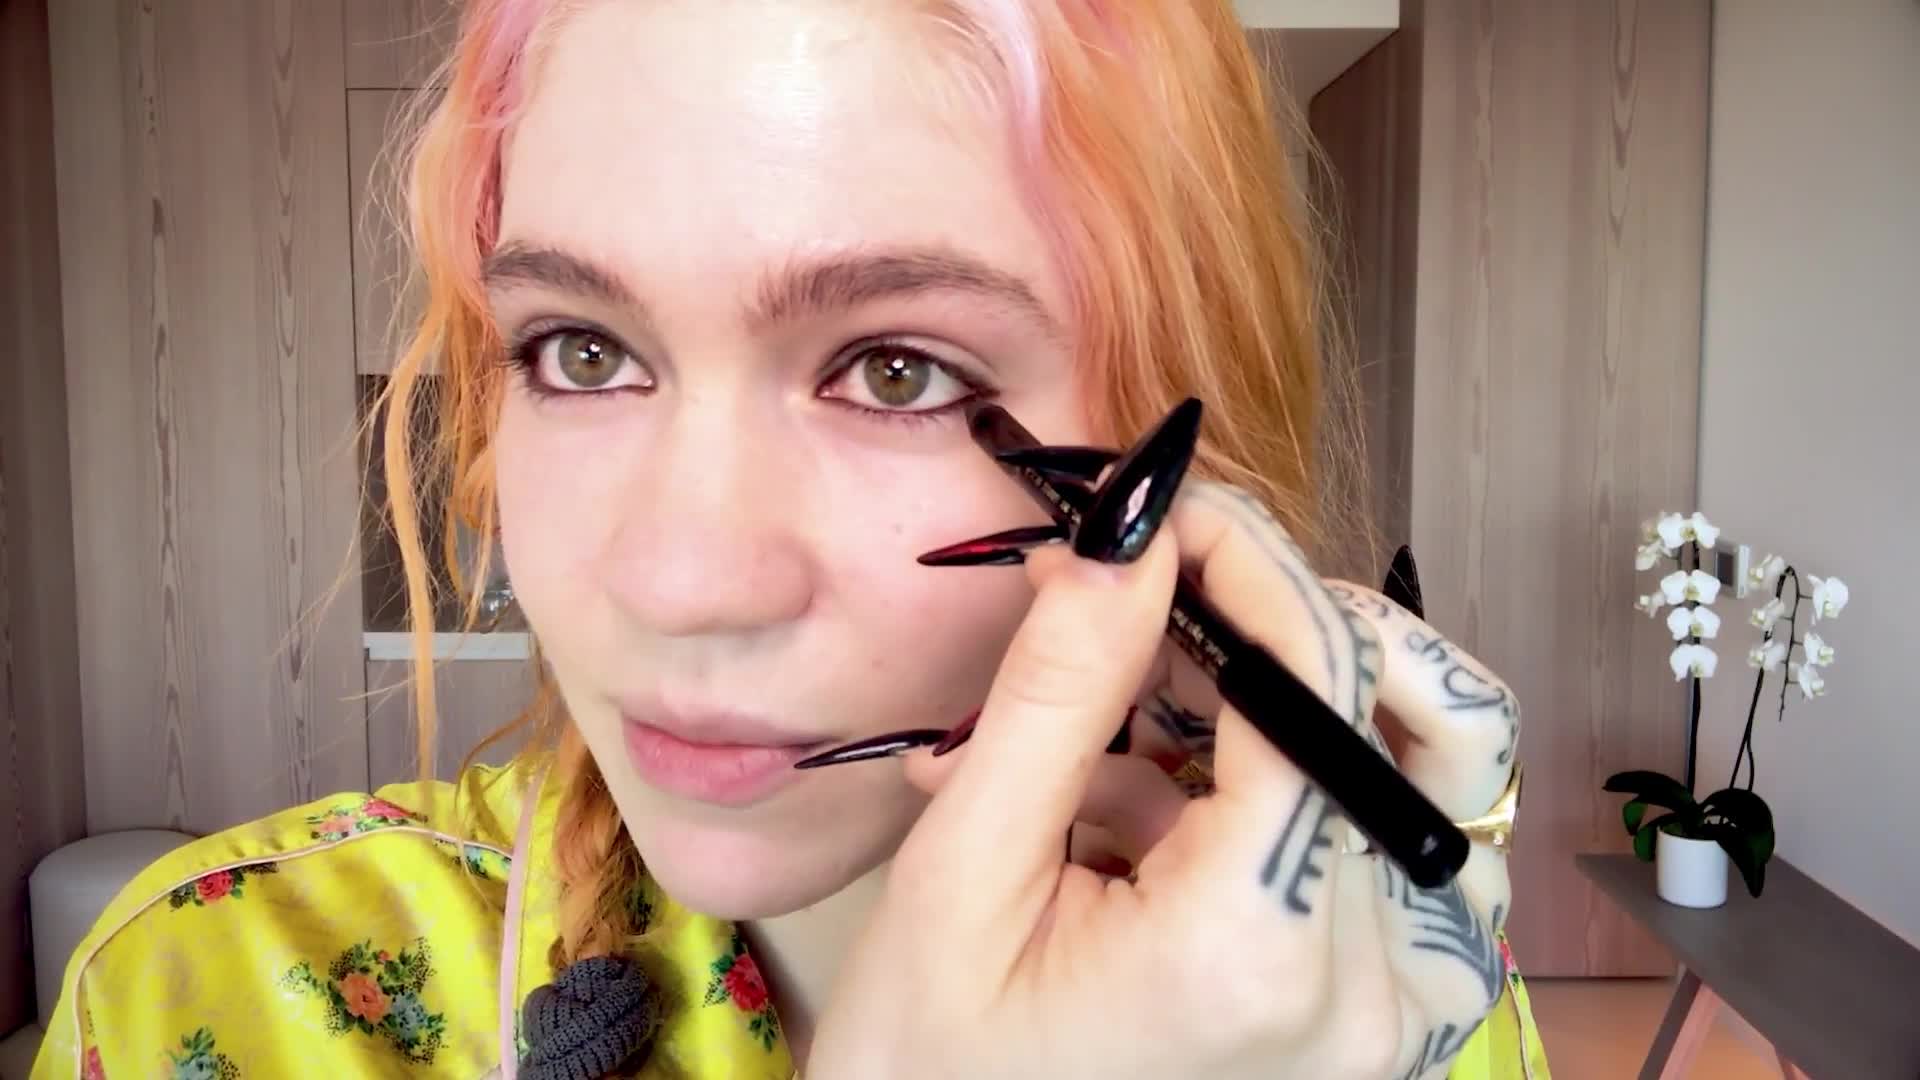 Watch Beauty Secrets Watch Grimes Do Her Pregnancy Skincare And Psychedelic Makeup Routine Vogue Video Cne Vogue Com Vogue